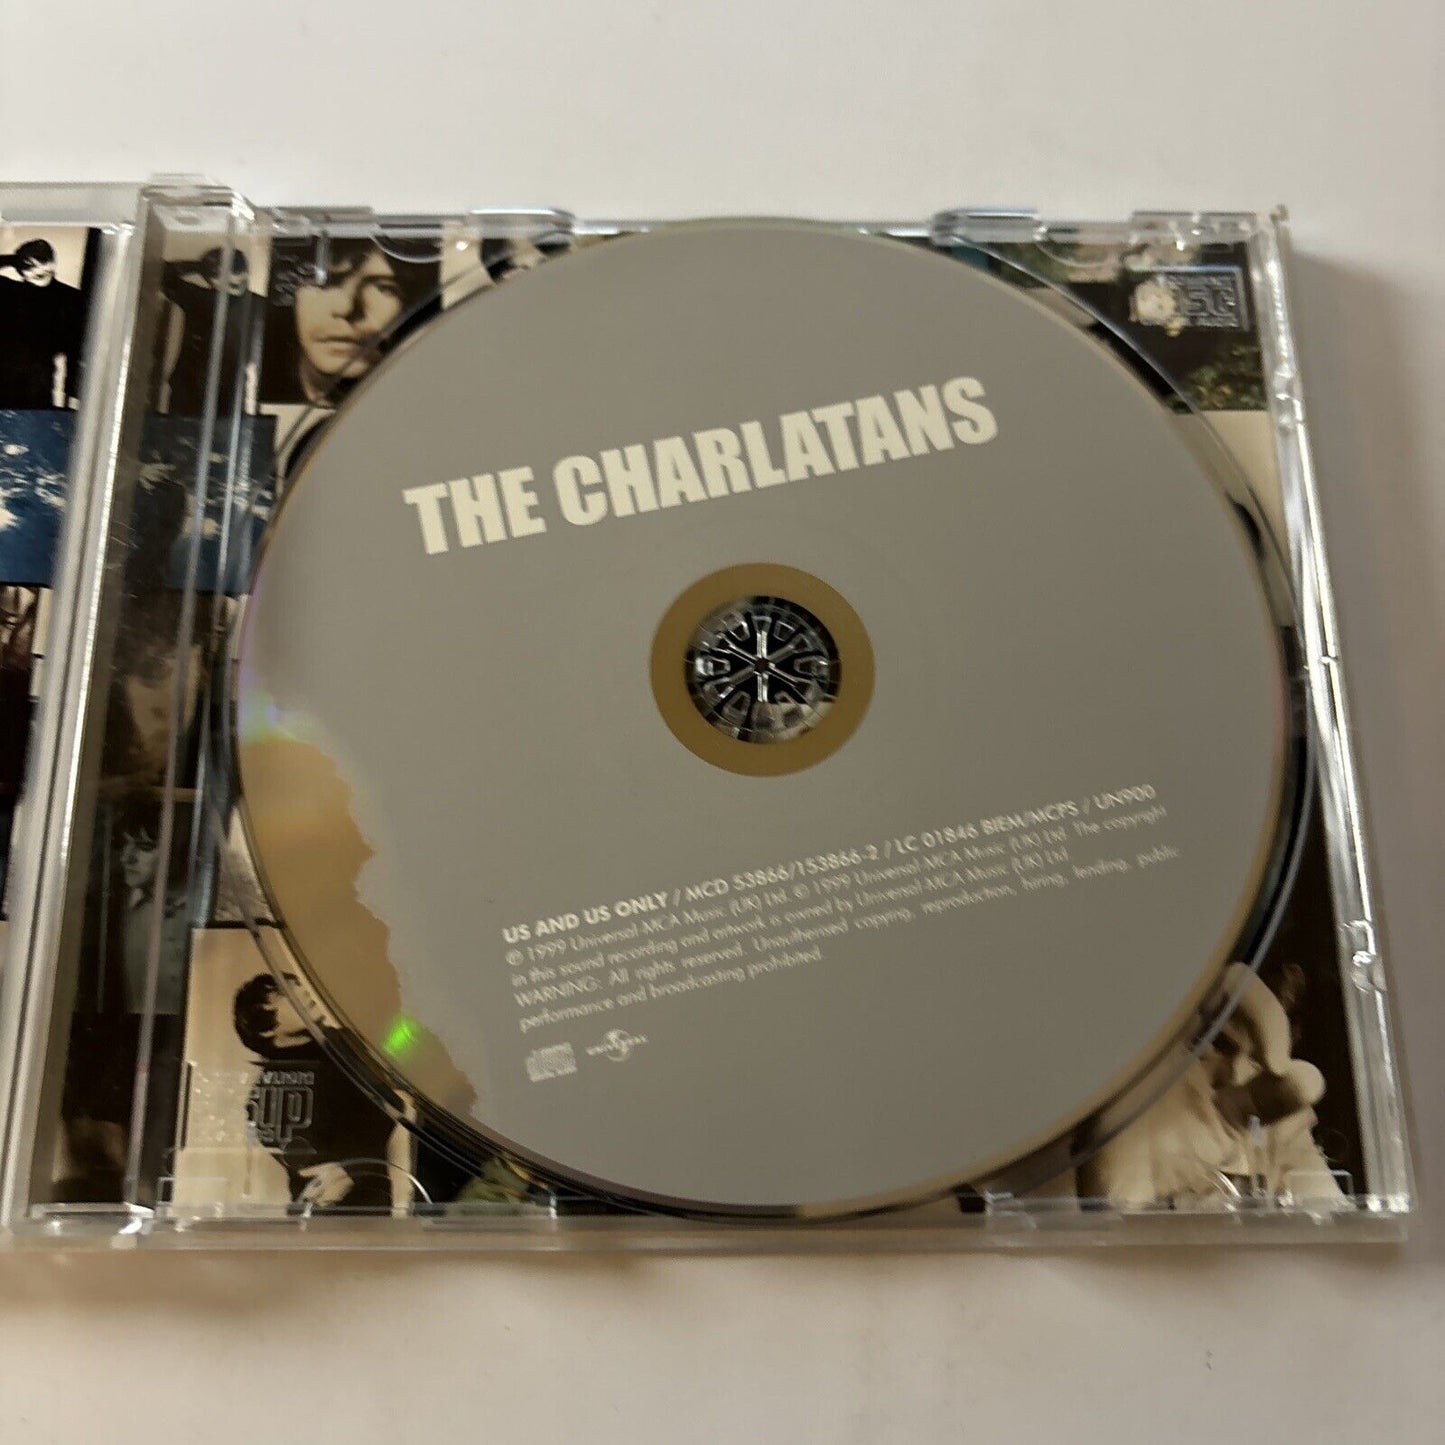 The Charlatans - Us and Us Only (CD, 1999) Mcd-53866